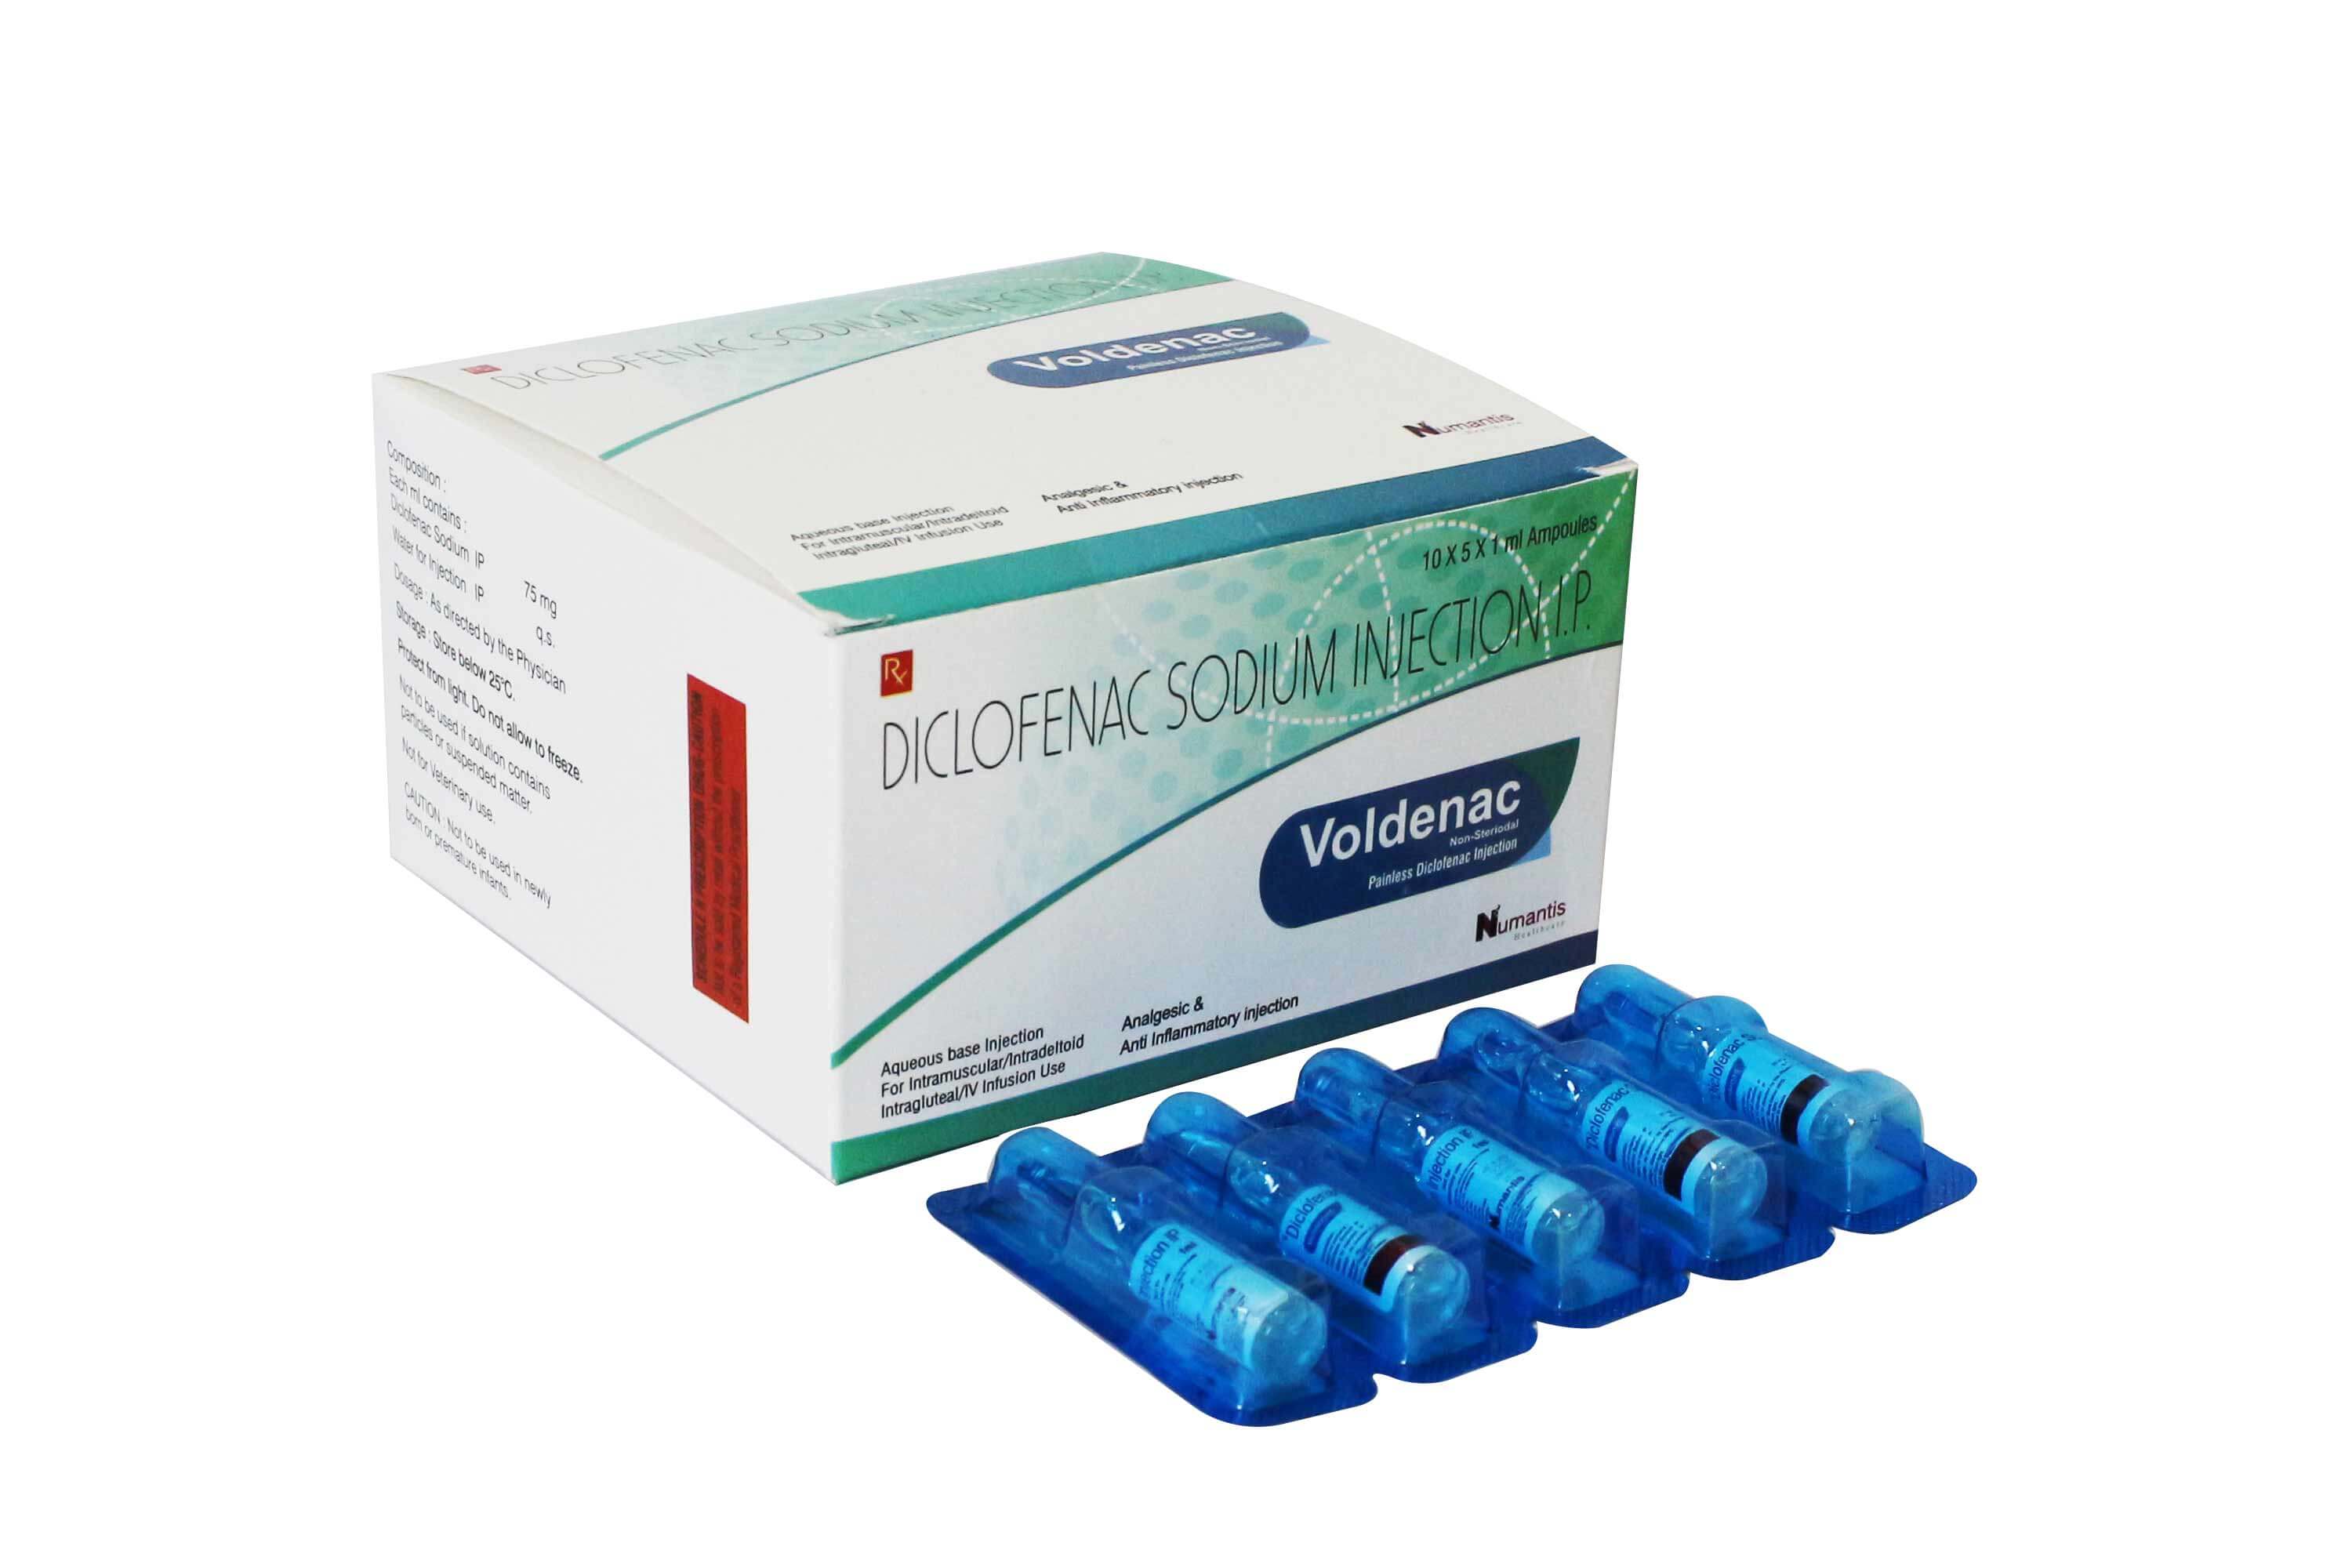 Product Name: Voldenac, Compositions of Voldenac are Diclofenac Sodium Injection IP - Numantis Healthcare